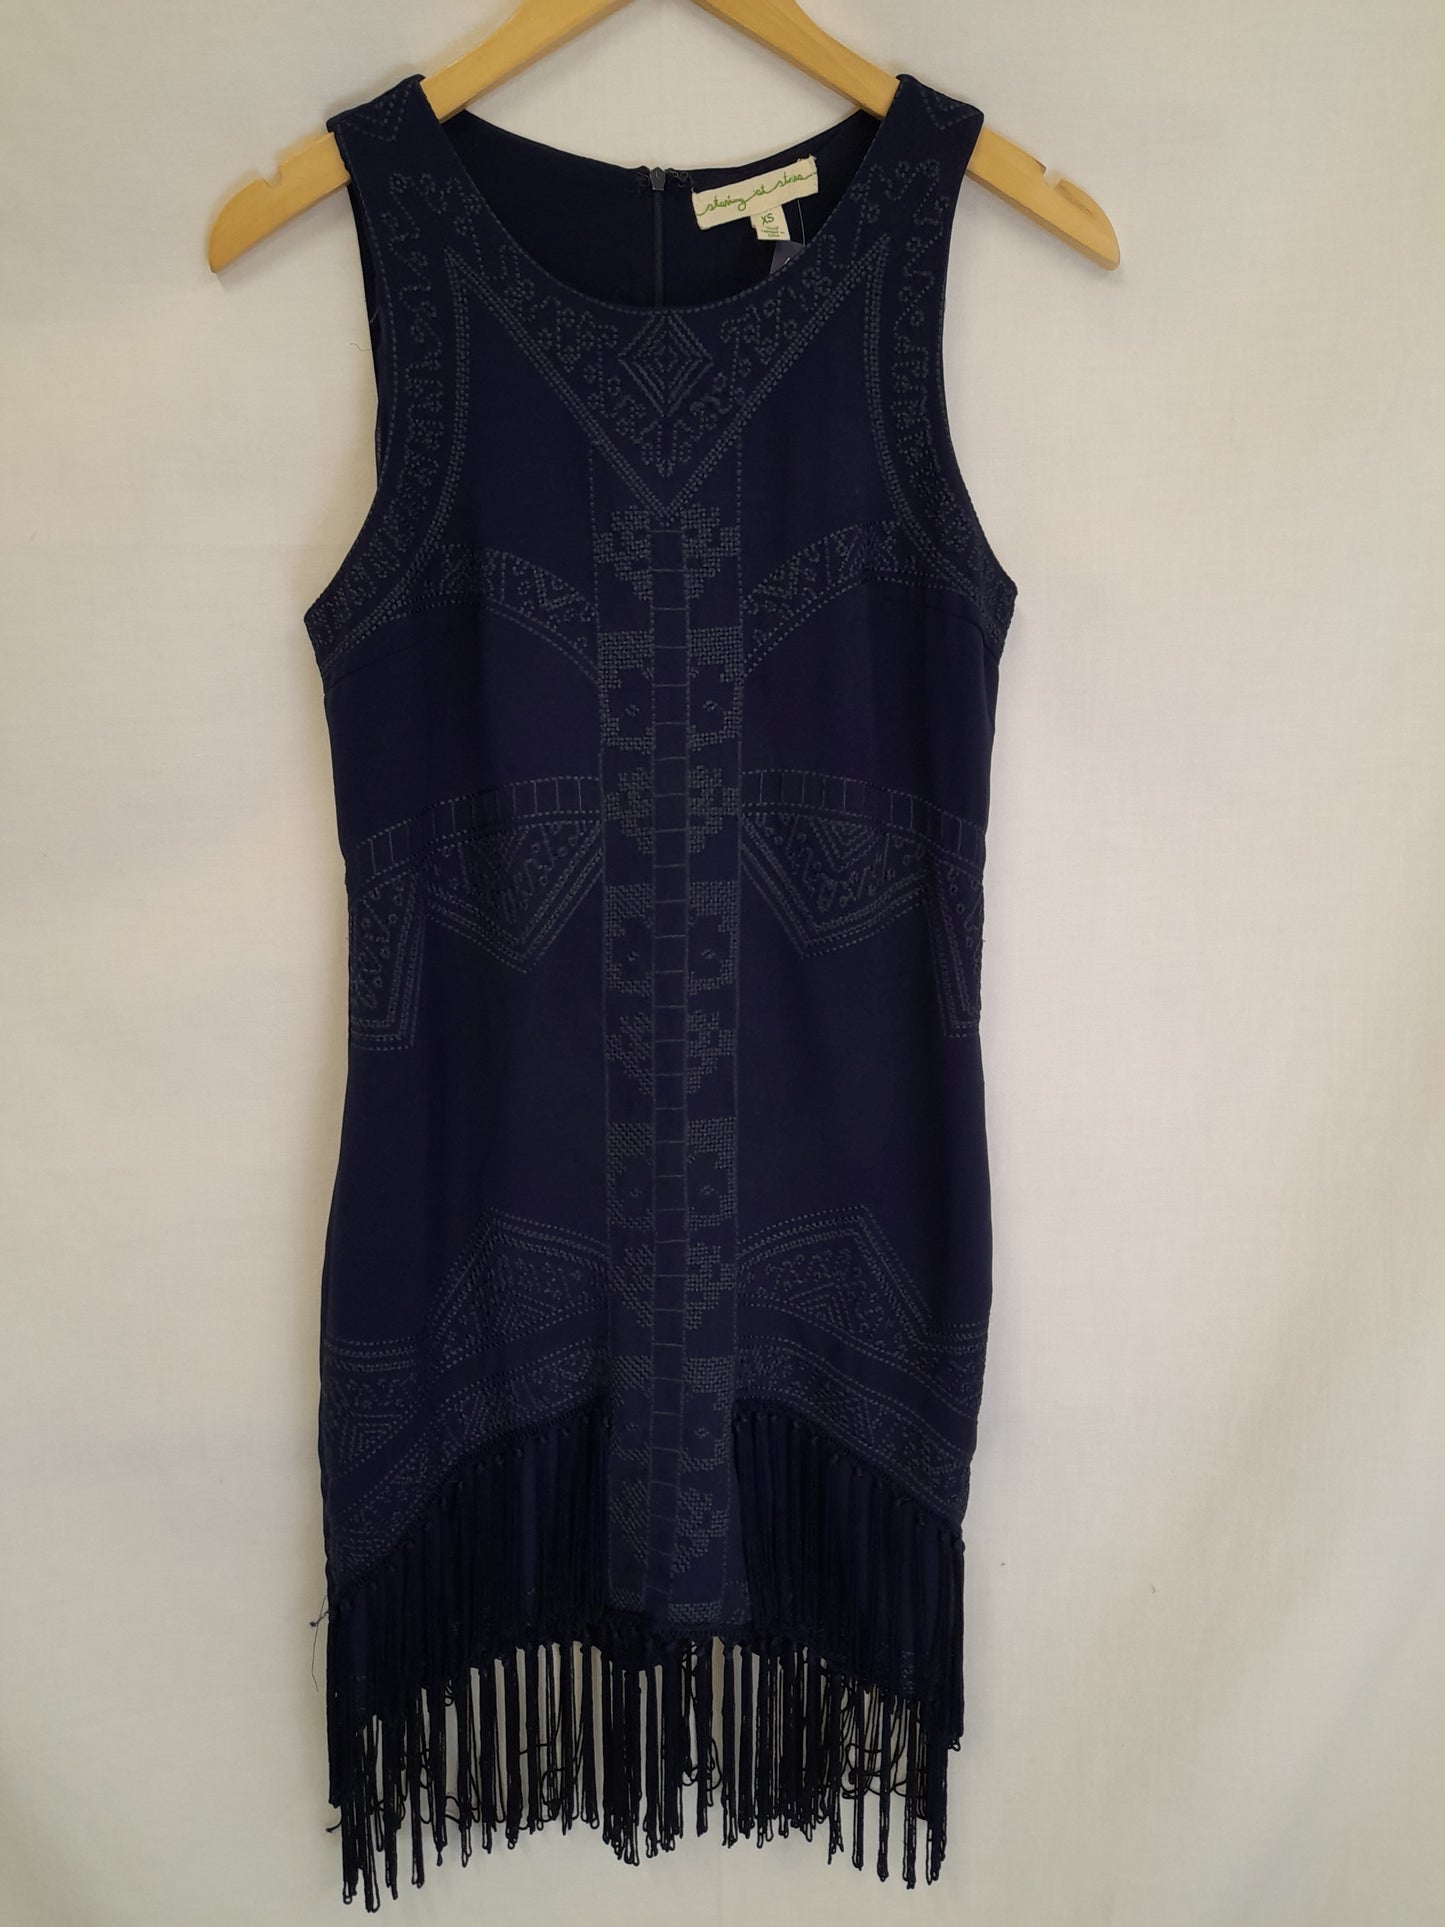 Navy Embroidered 'Staring At Stars' Dress Size XS